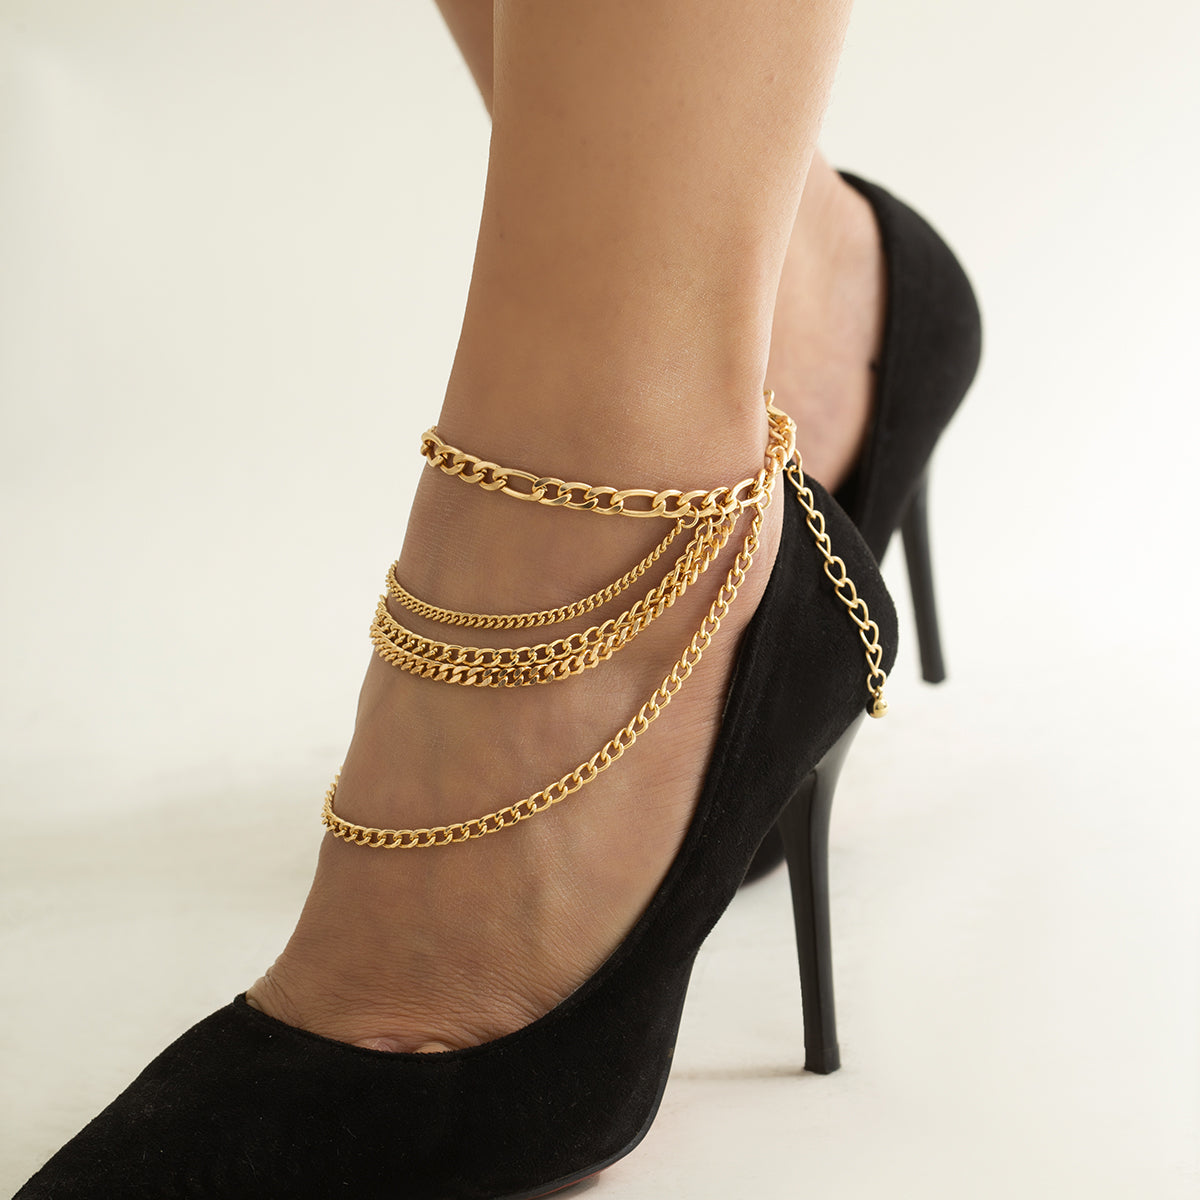 18K Gold-Plated Layered Curb Chain Anklet